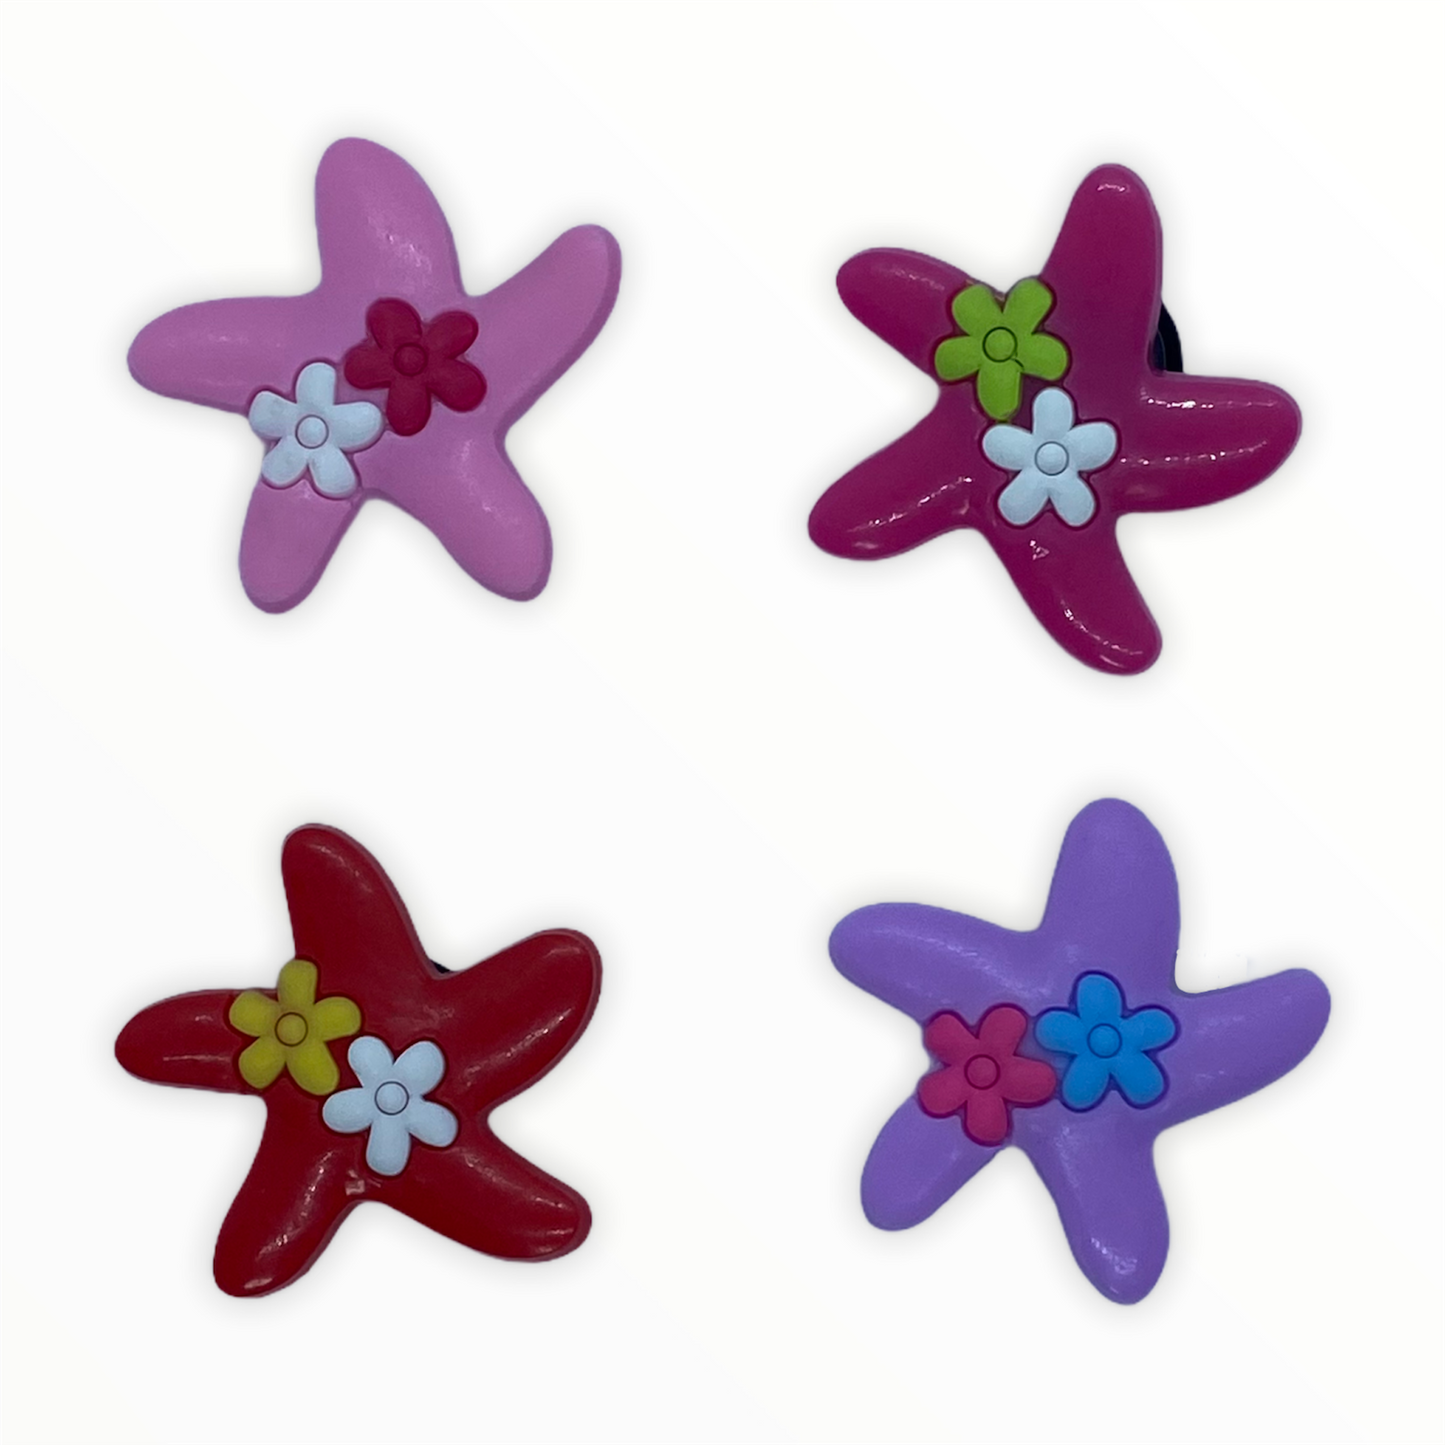 JENDORE OCEAN BEACH STARFISH SHOE CHARMS FOR CLOGS OR BRACELET